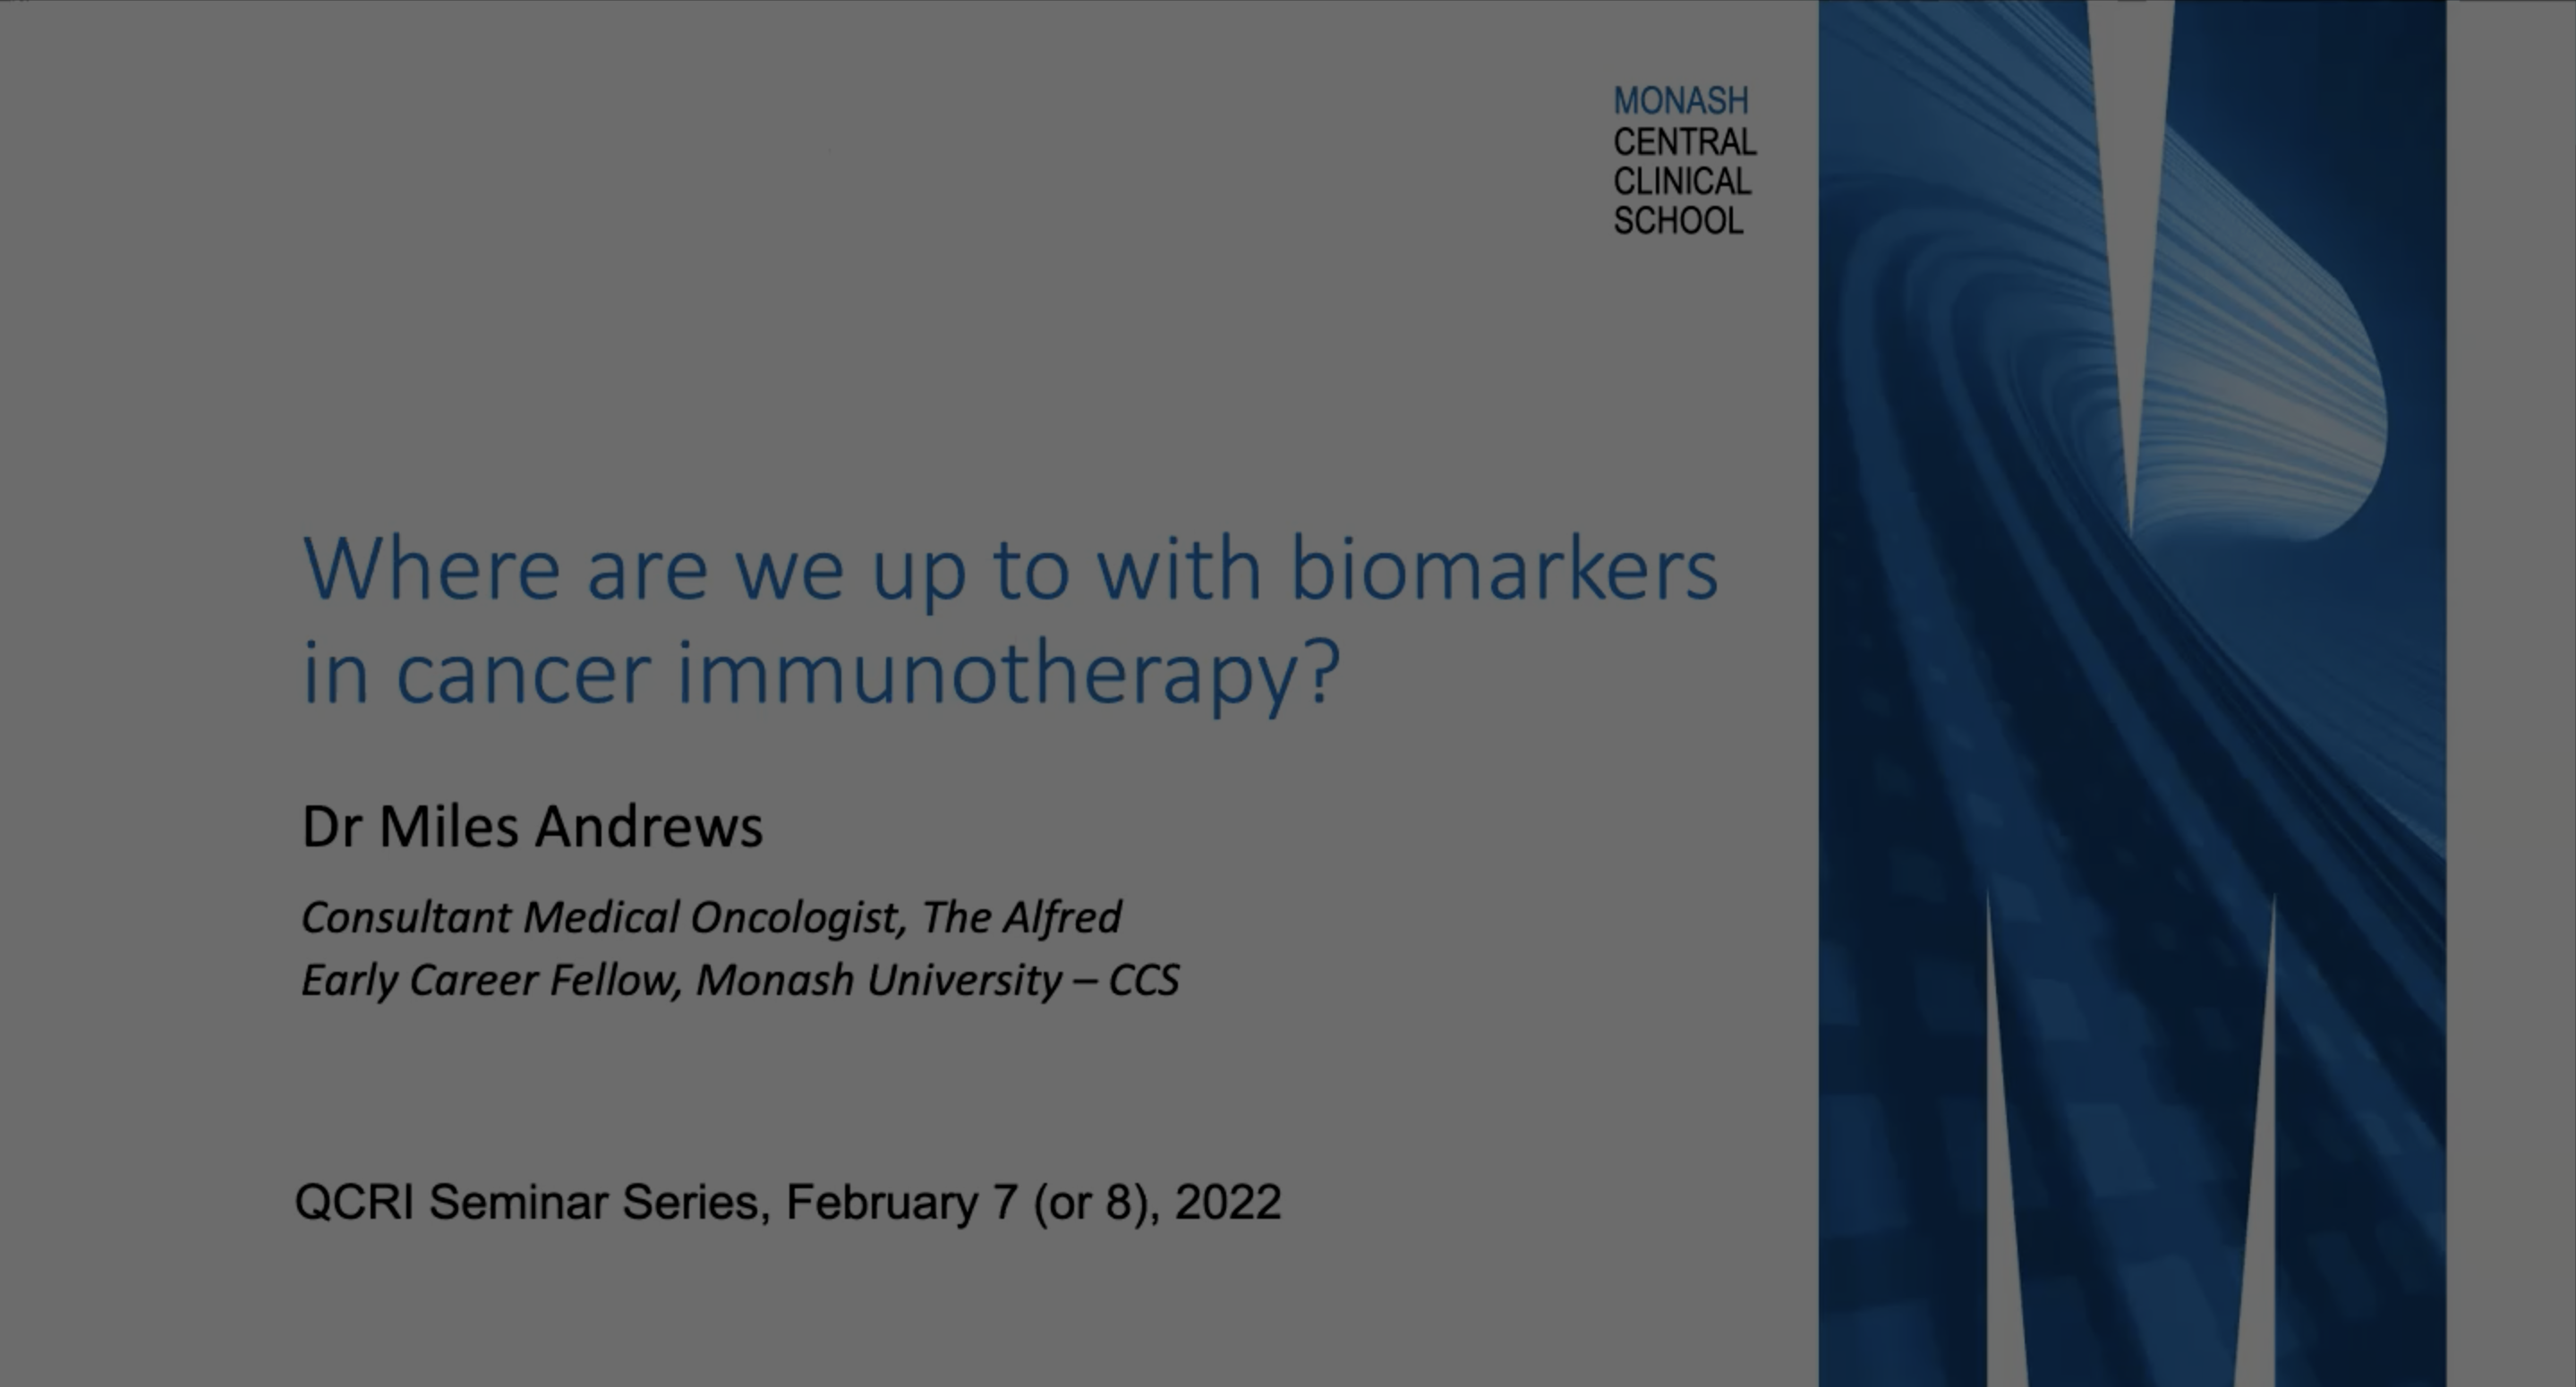 Feb 7, 2022 | Where are we up to with biomarkers in cancer immunotherapy?